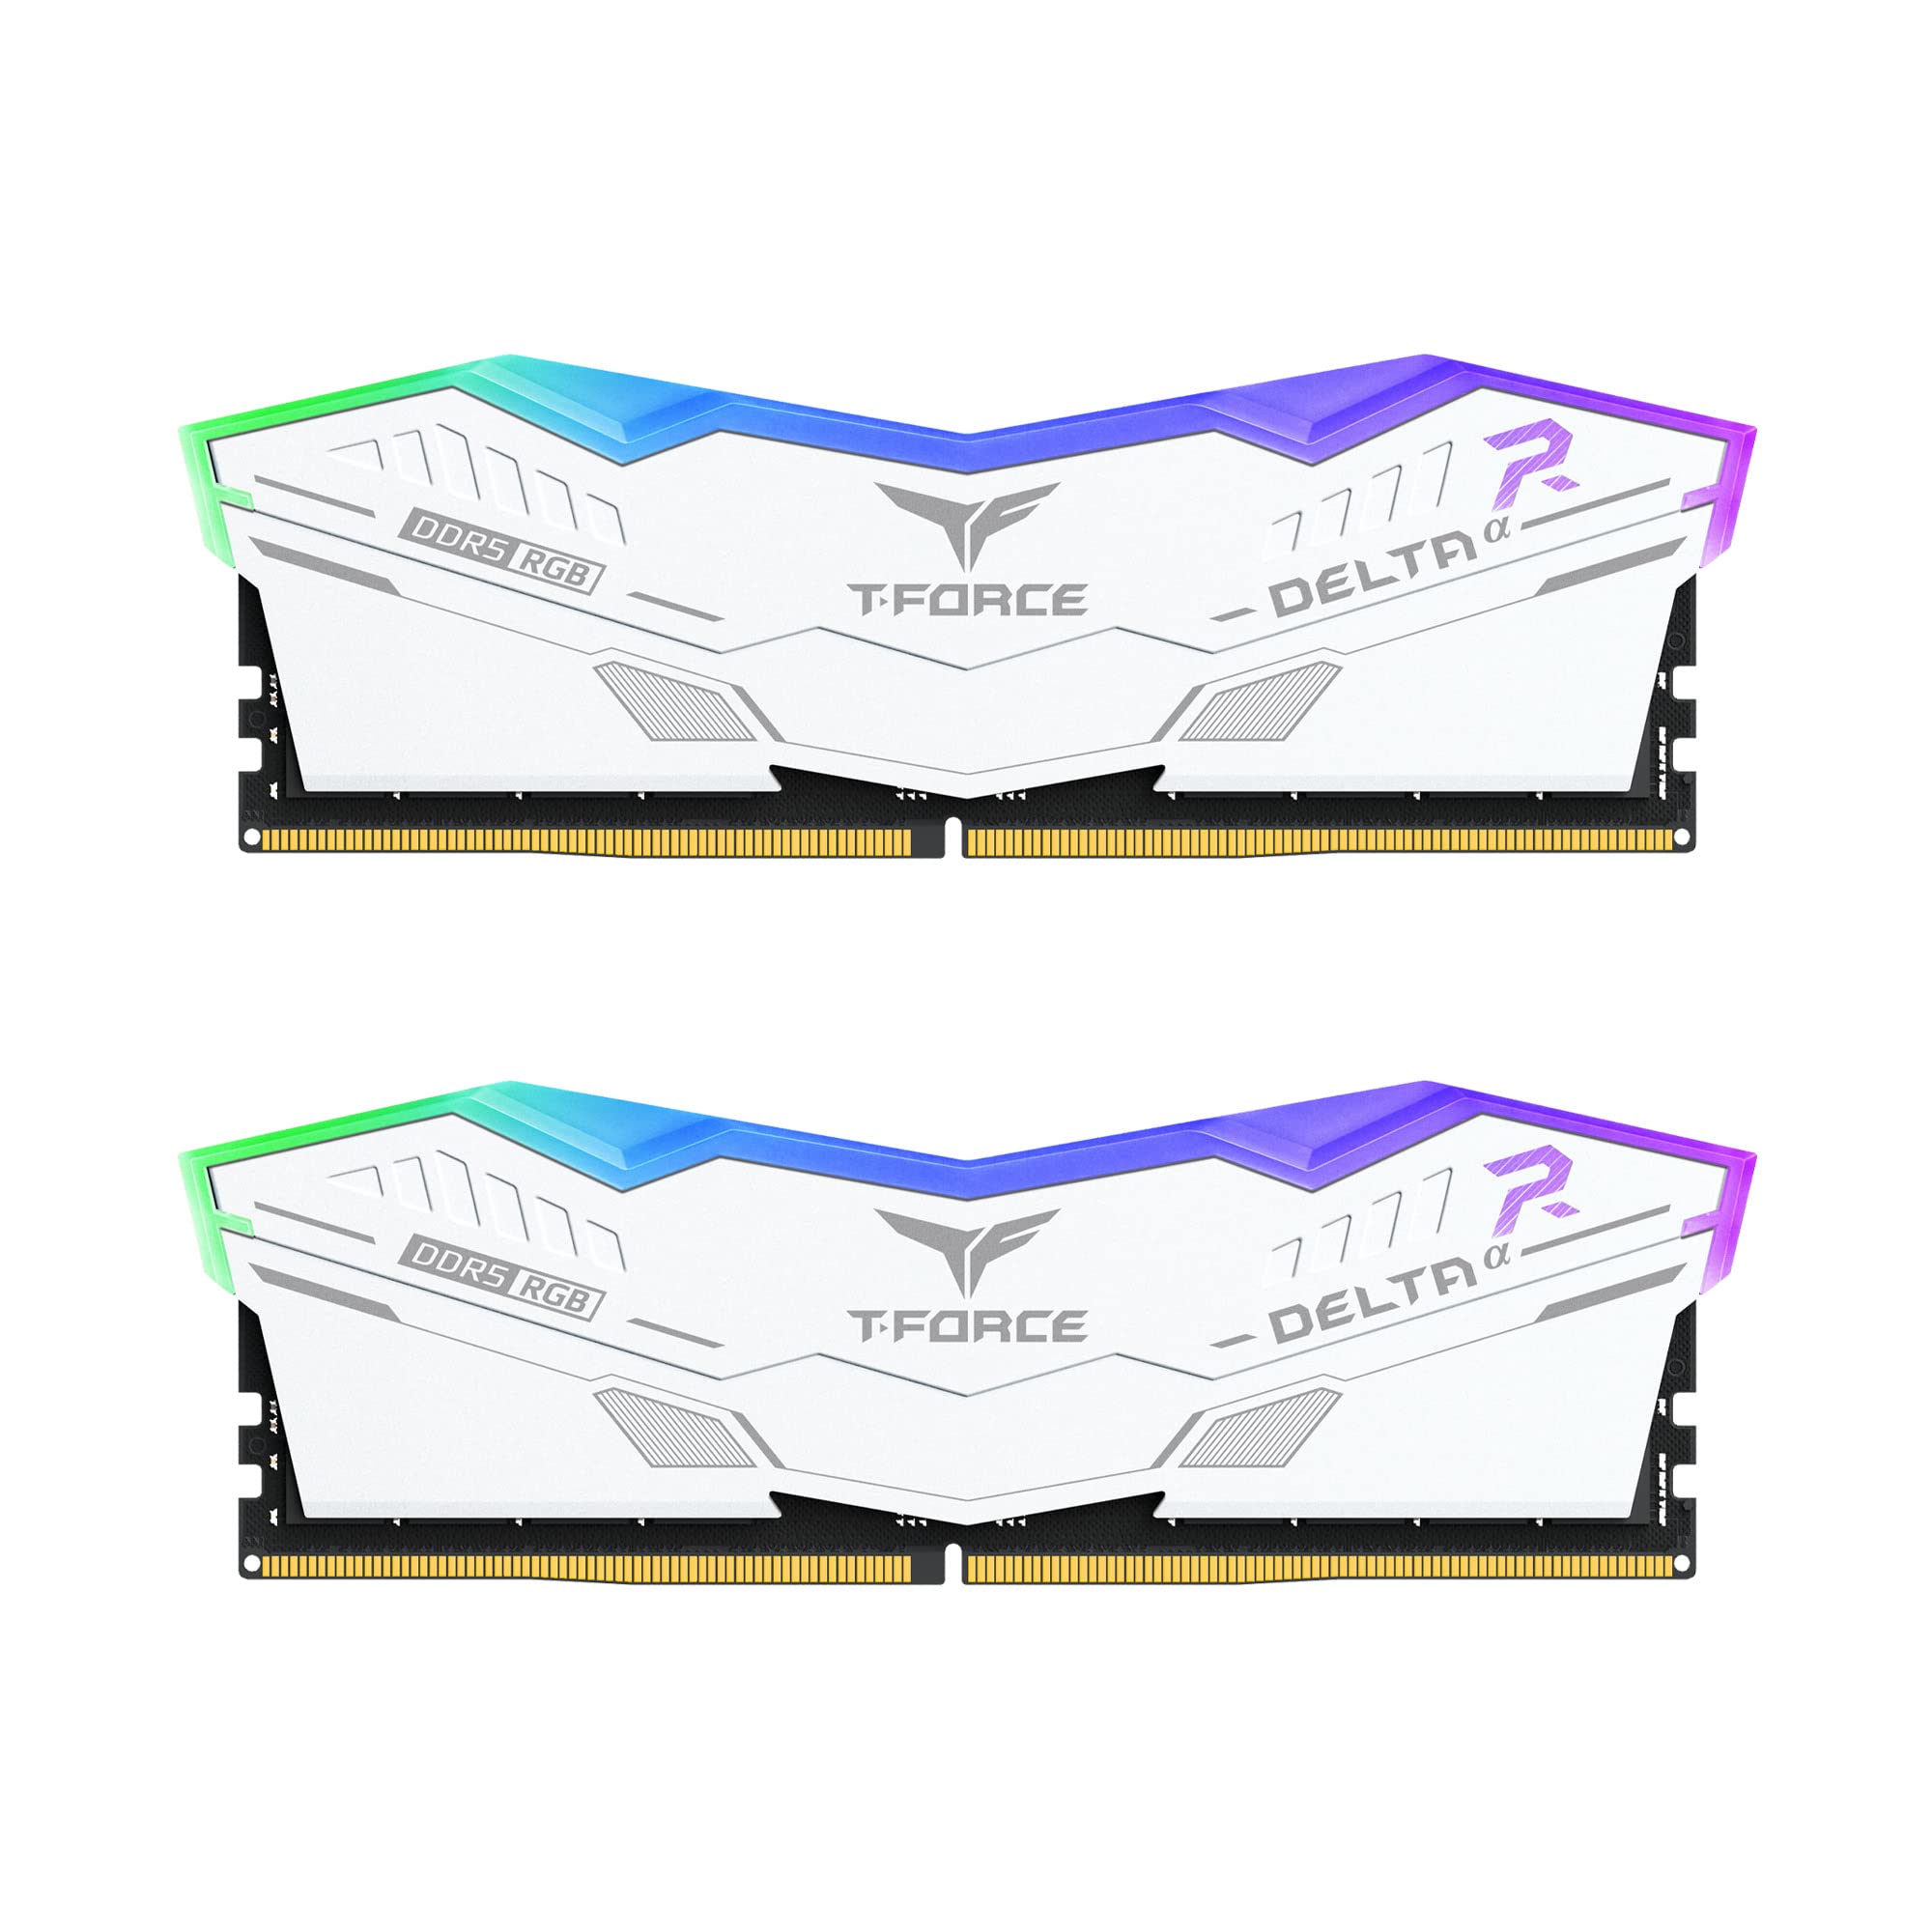 TEAMGROUP T-Force Delta Alpha RGB DDR5 Ram 32GB Kit (2x16GB) 6000MHz (PC5-48000) CL38 Intel XMP 3.0 & AMD Expo Compatible Desktop Memory Module Ram White - FF8D532G6000HC38ADC01